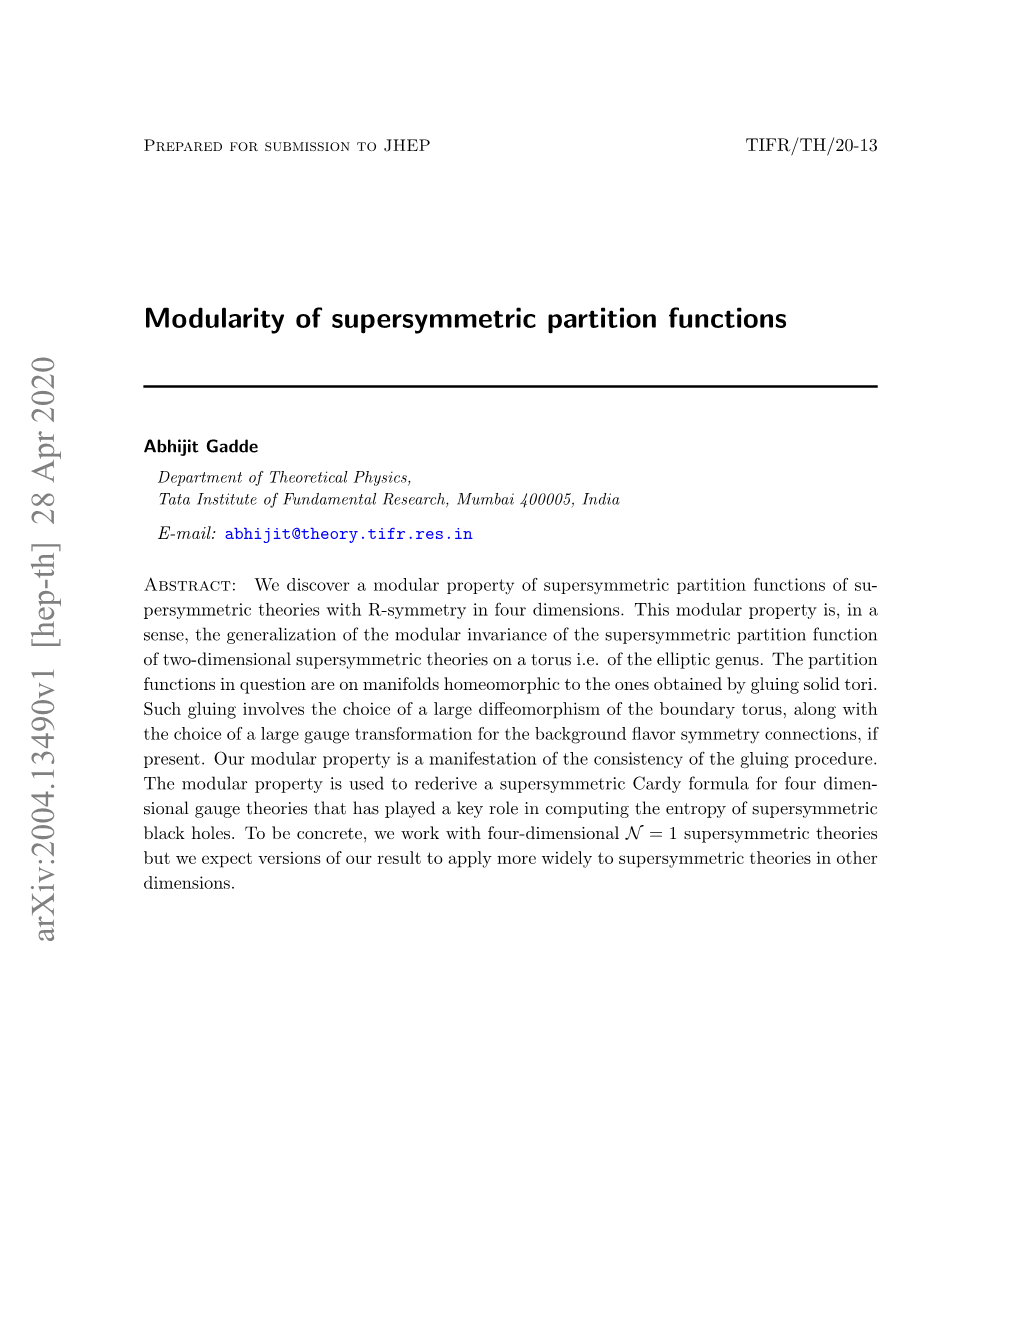 Modularity of Supersymmetric Partition Functions